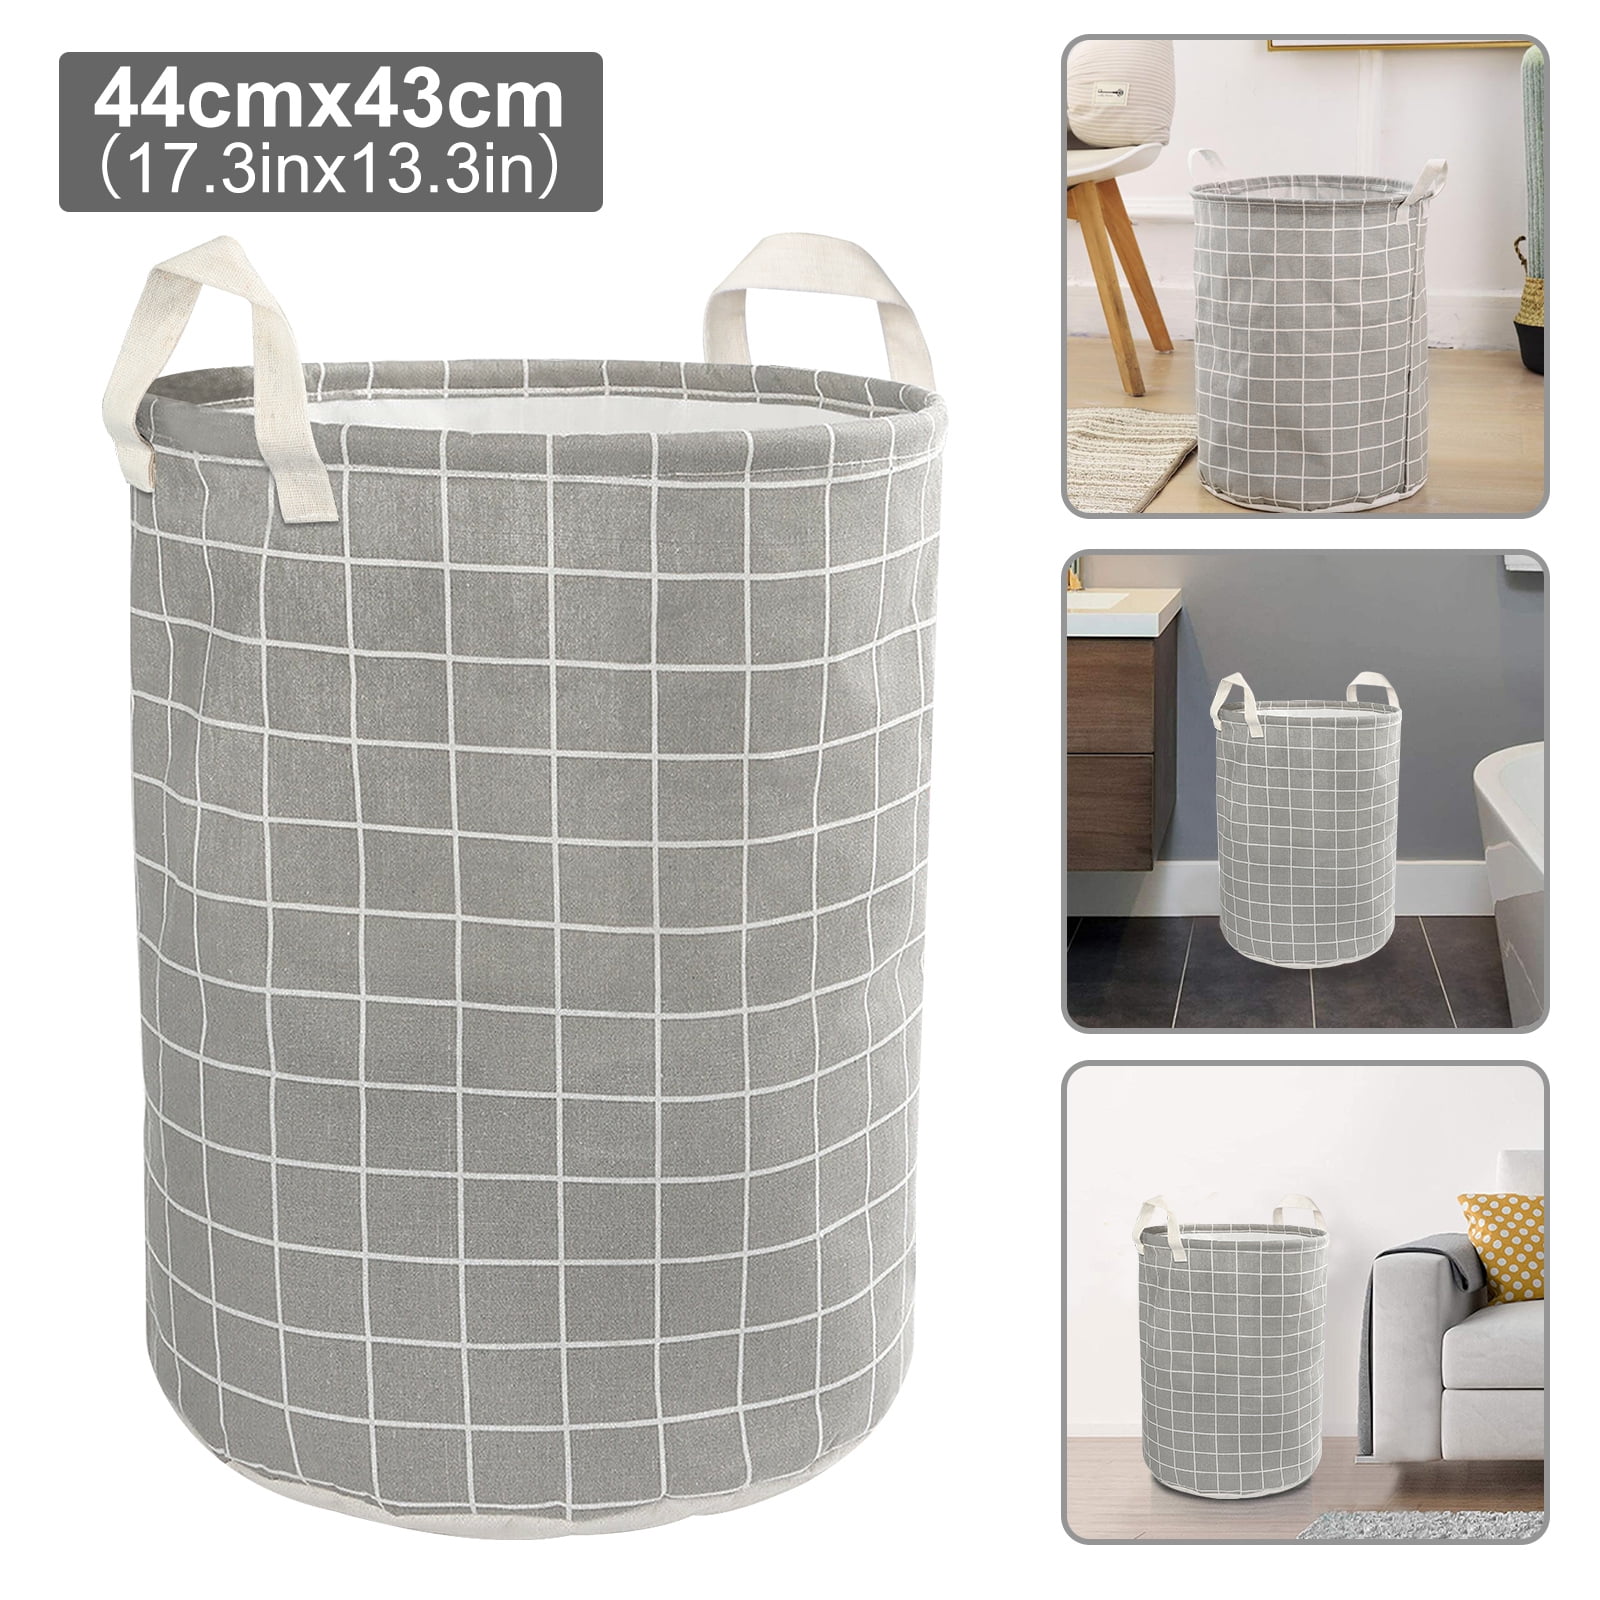 folding pop-up laundry basket is suitable for children's rooms 2 Packs Mesh pop-up laundry basket university dormitories or travel durable handle foldable mesh laundry basket